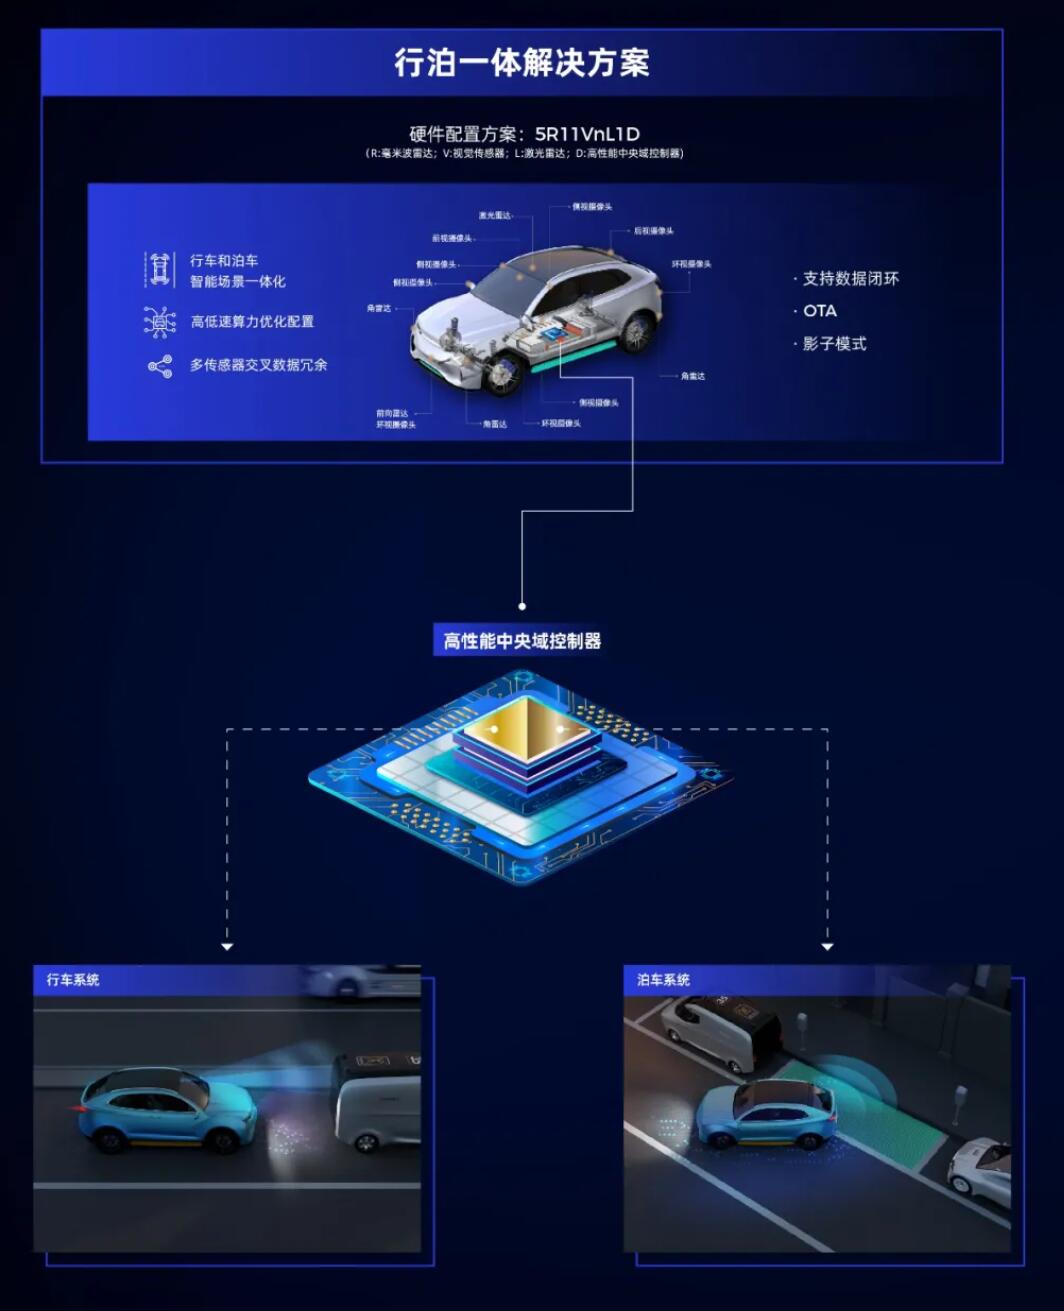 NIO-backed chip maker Black Sesame partners with self-driving tech provider MAXIEYE to create smart driving solutions-CnEVPost